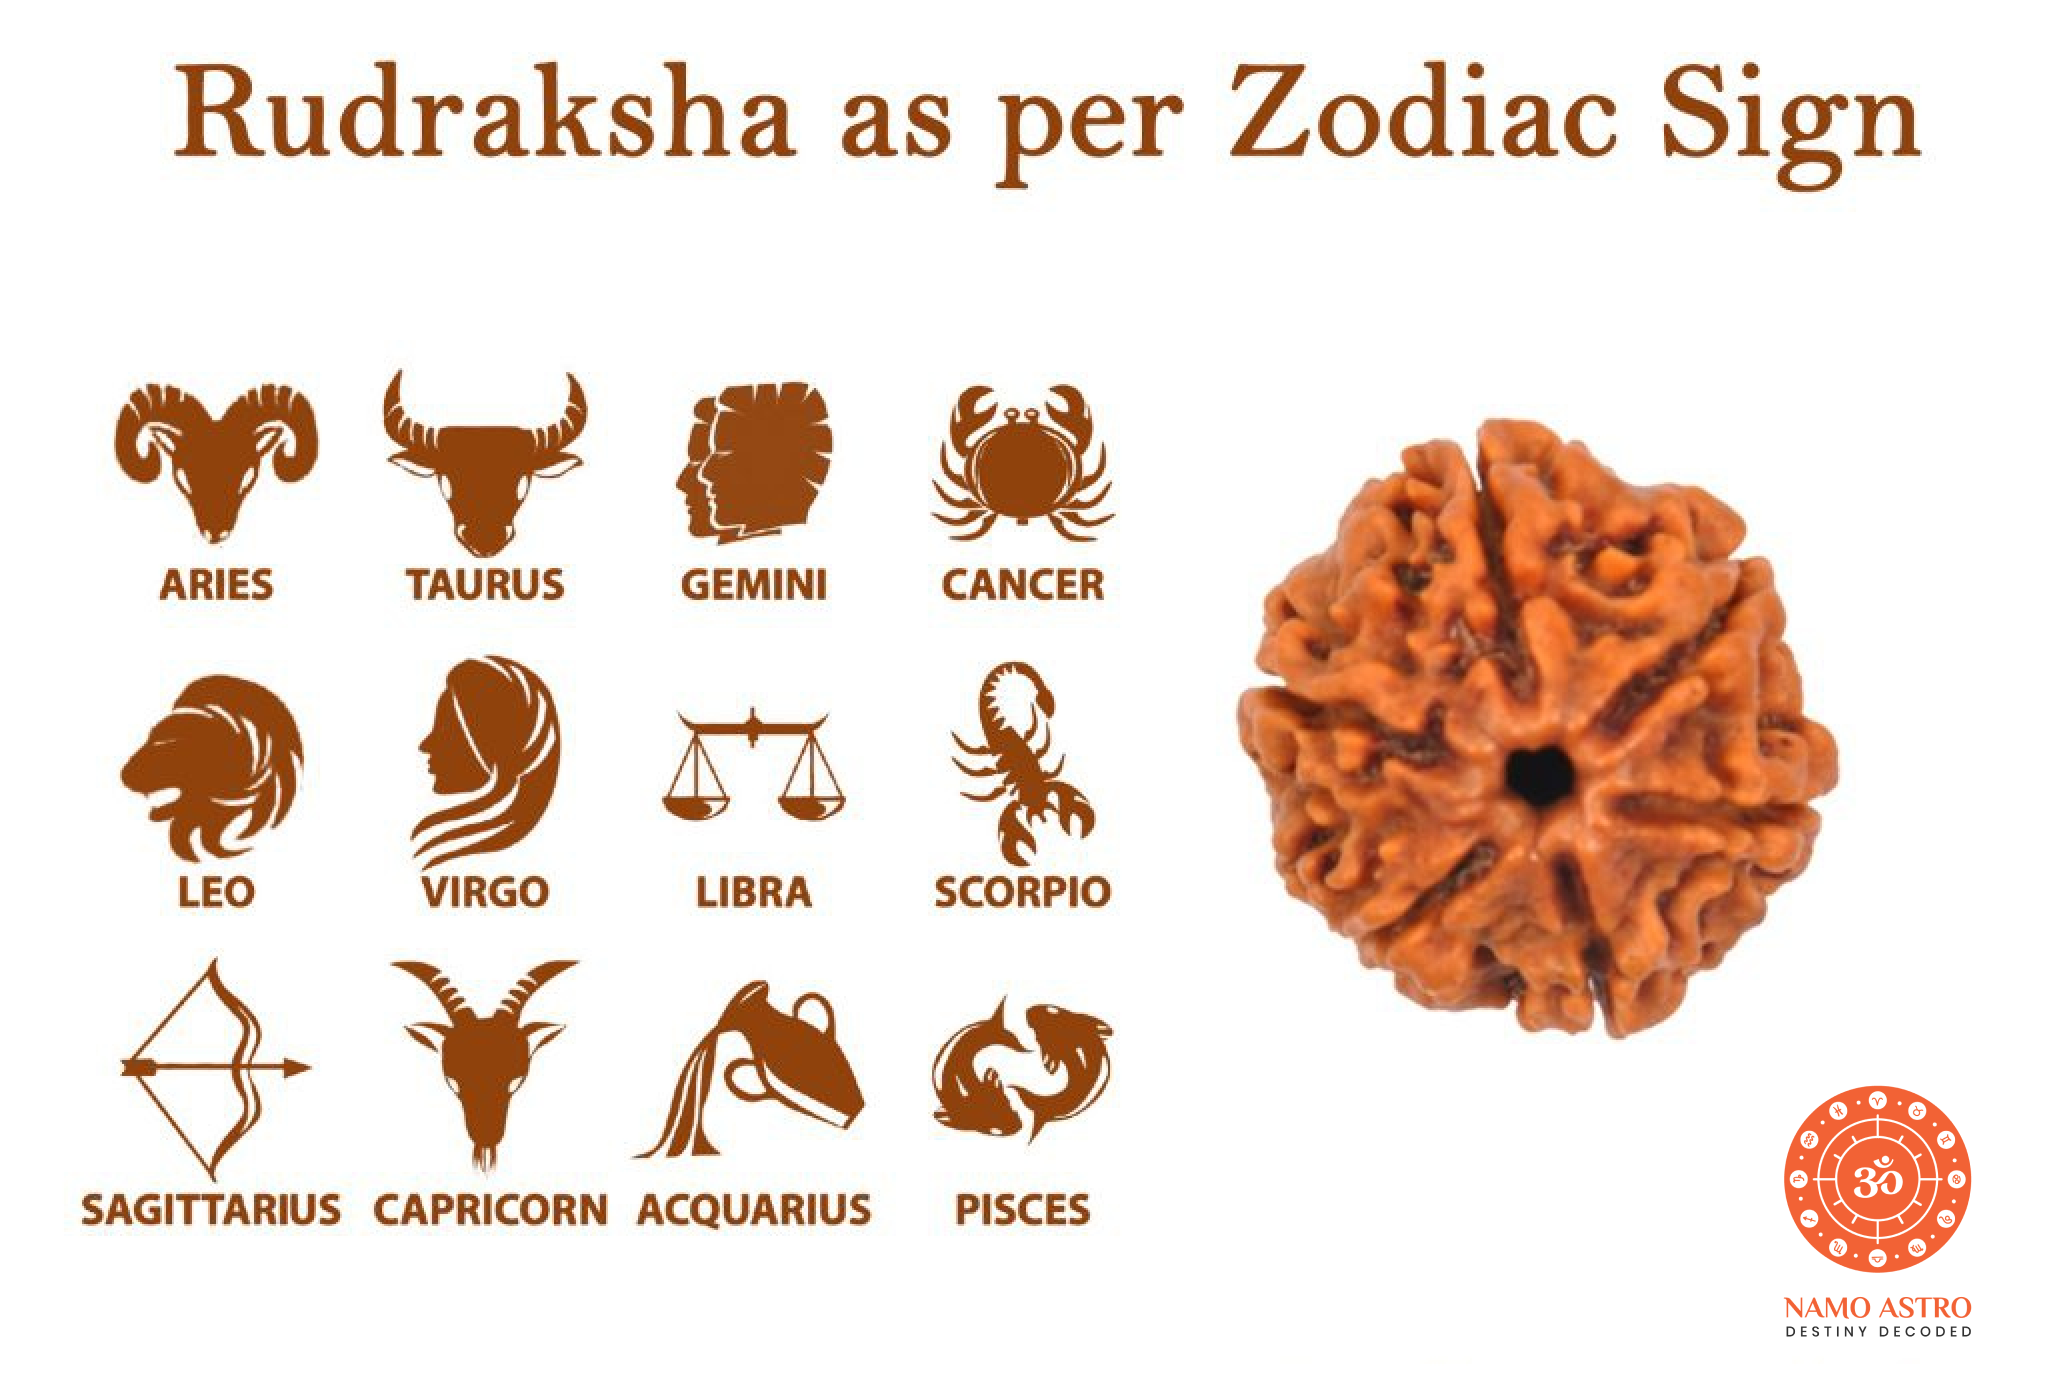 Choose Your Rudraksha According to Your Zodiac Sign